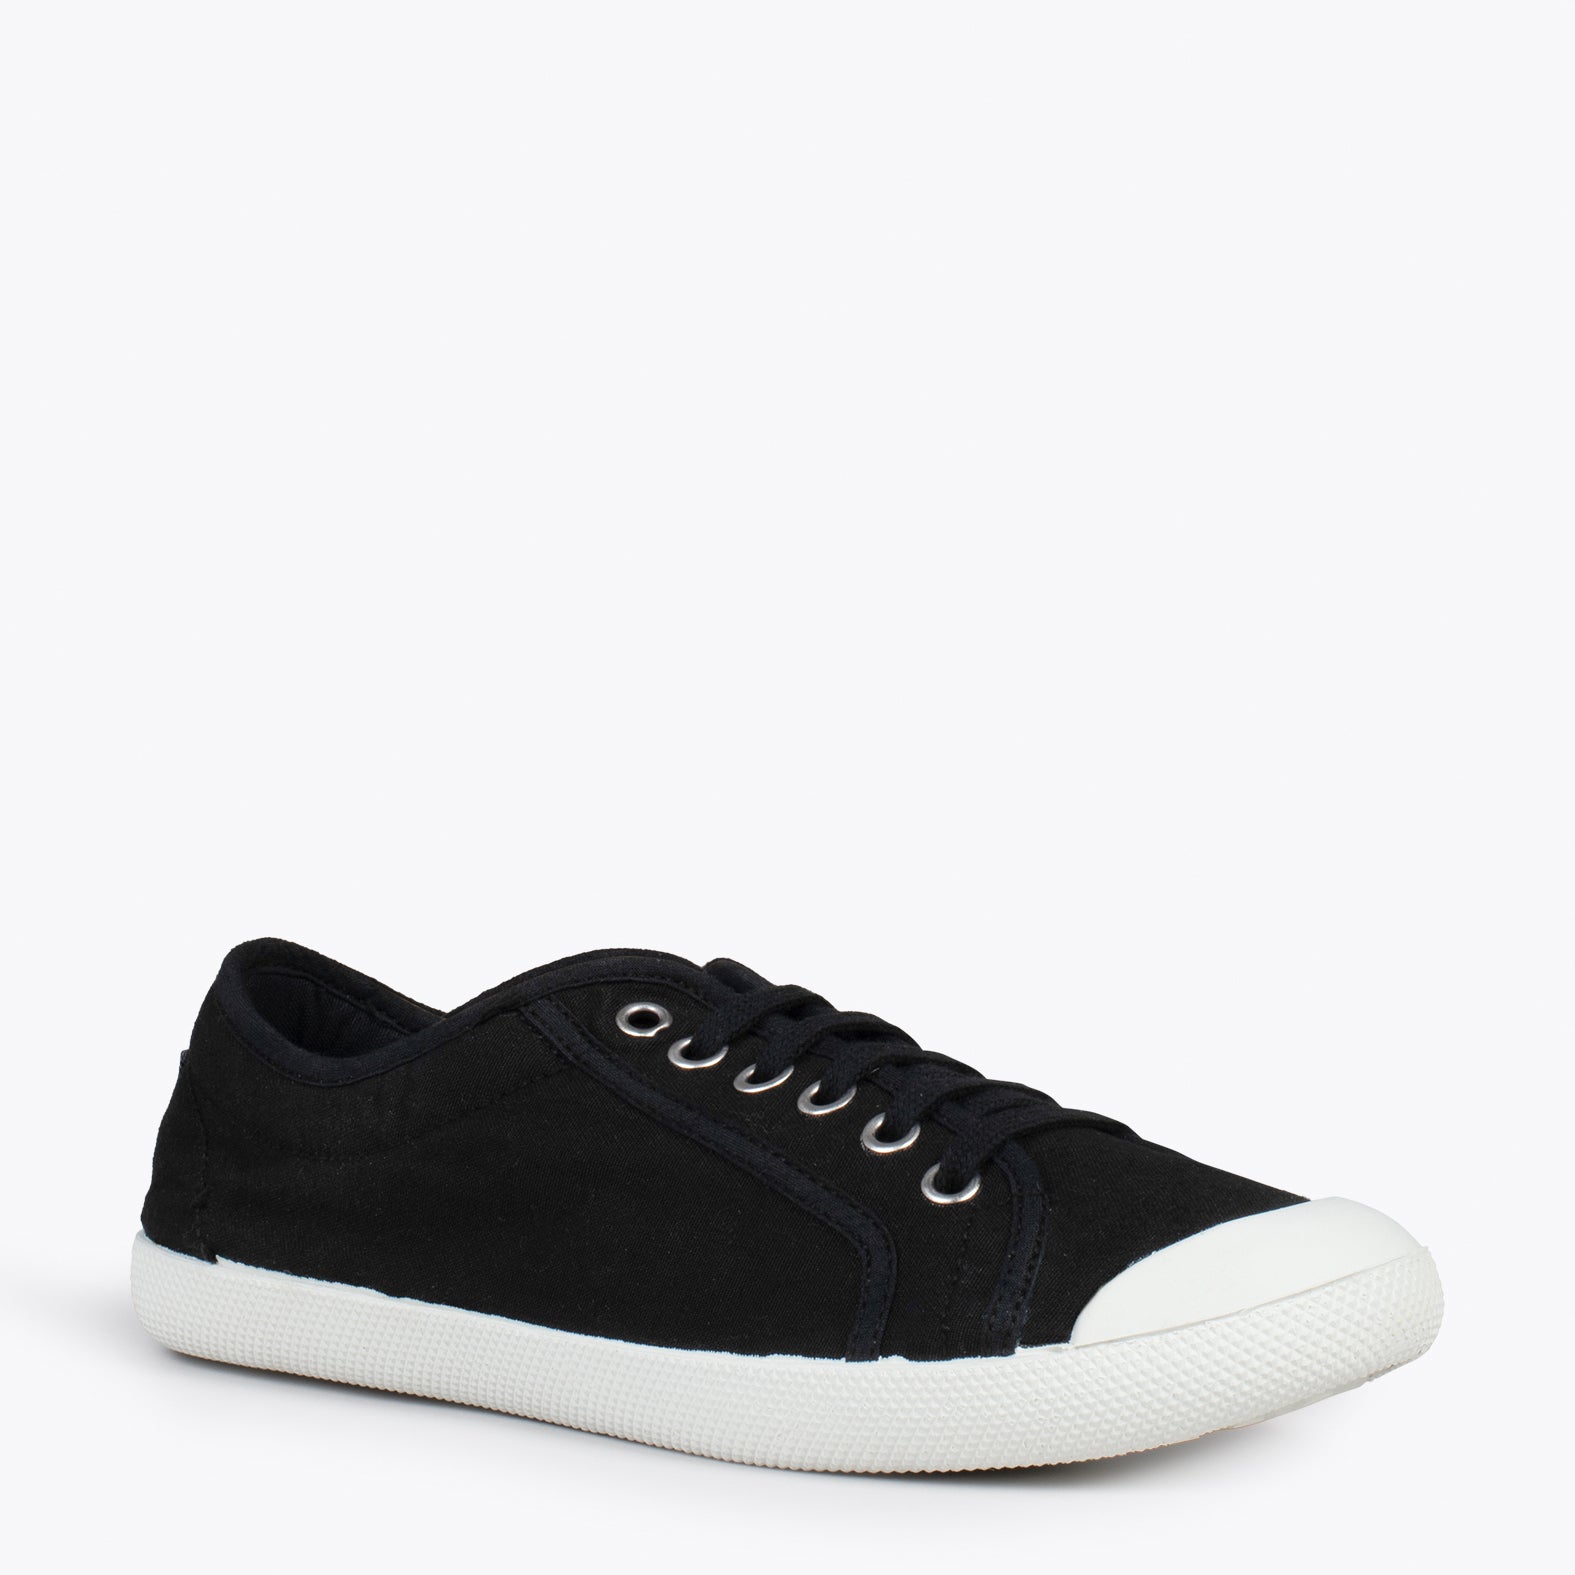 BAOBAB – BLACK BCI cotton sneakers from IO&GO